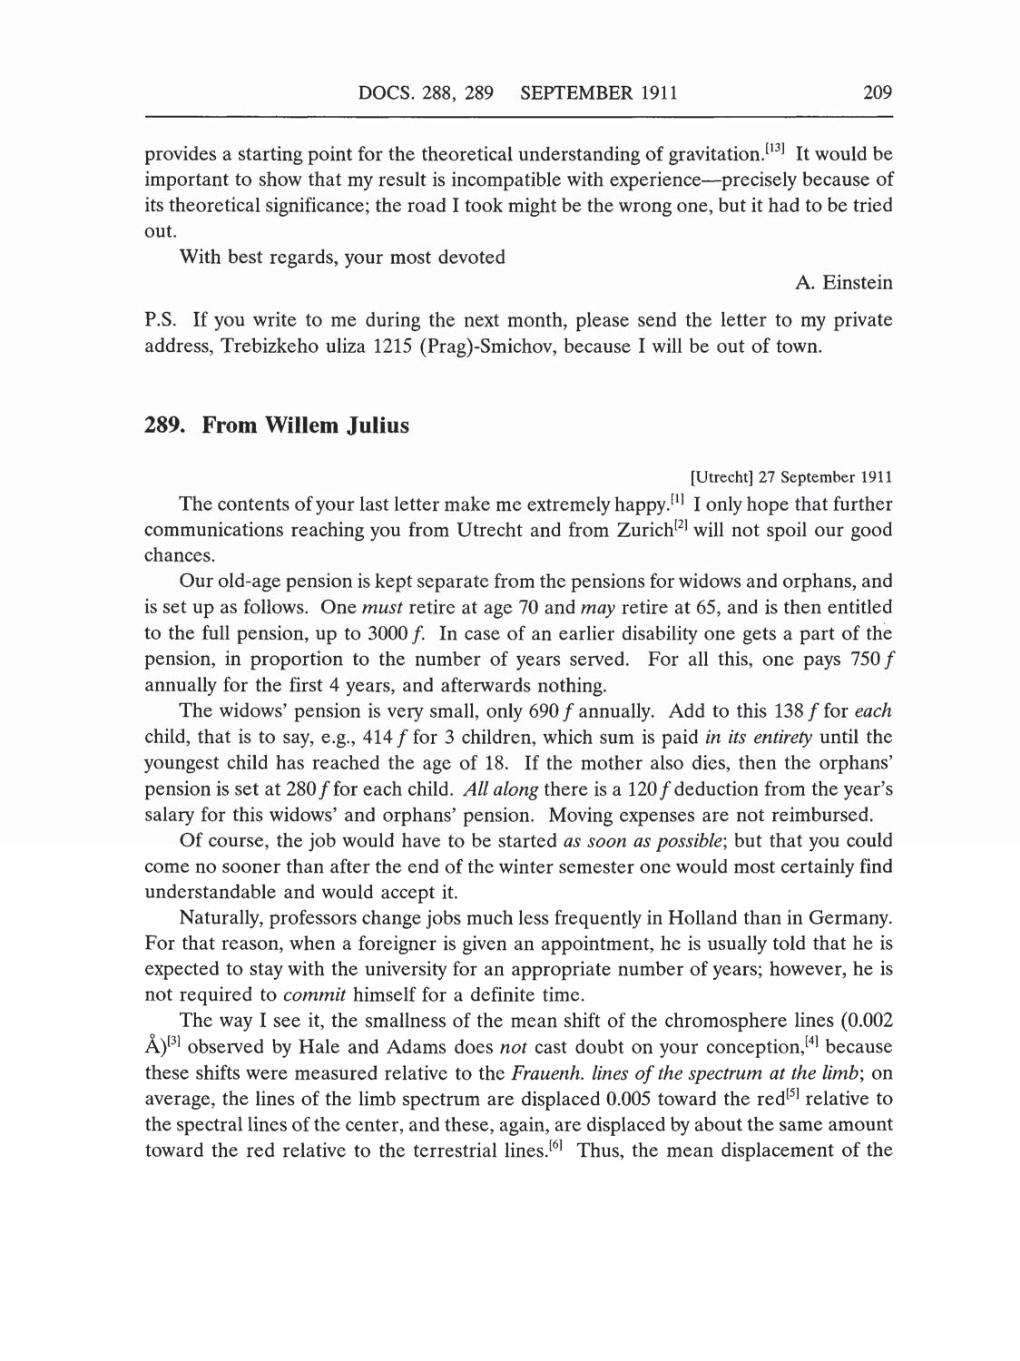 Volume 5: The Swiss Years: Correspondence, 1902-1914 (English translation supplement) page 209